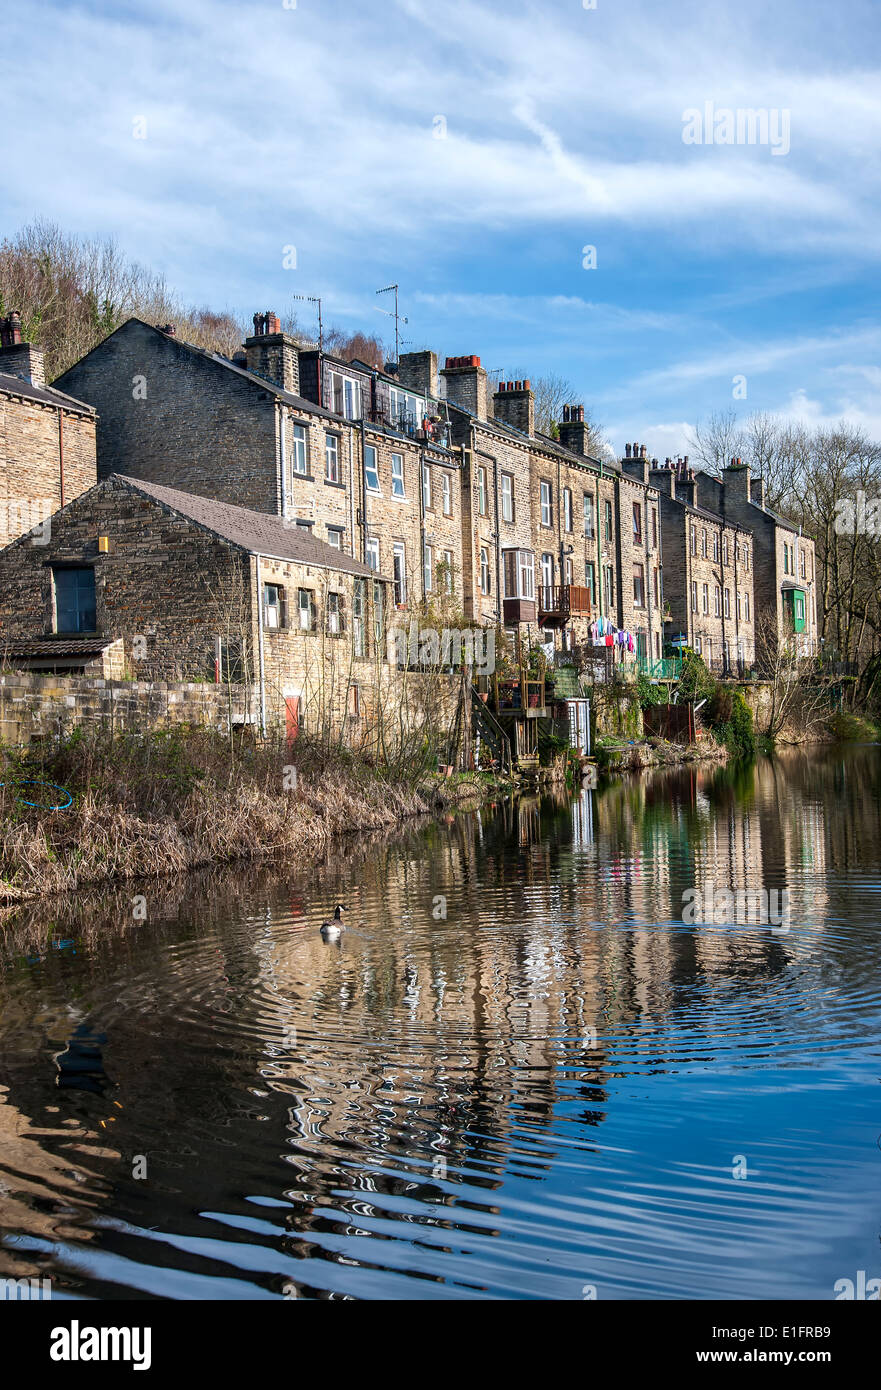 Tall back to back terraced houses on the banks of a canal in Yorkshire. Stock Photo